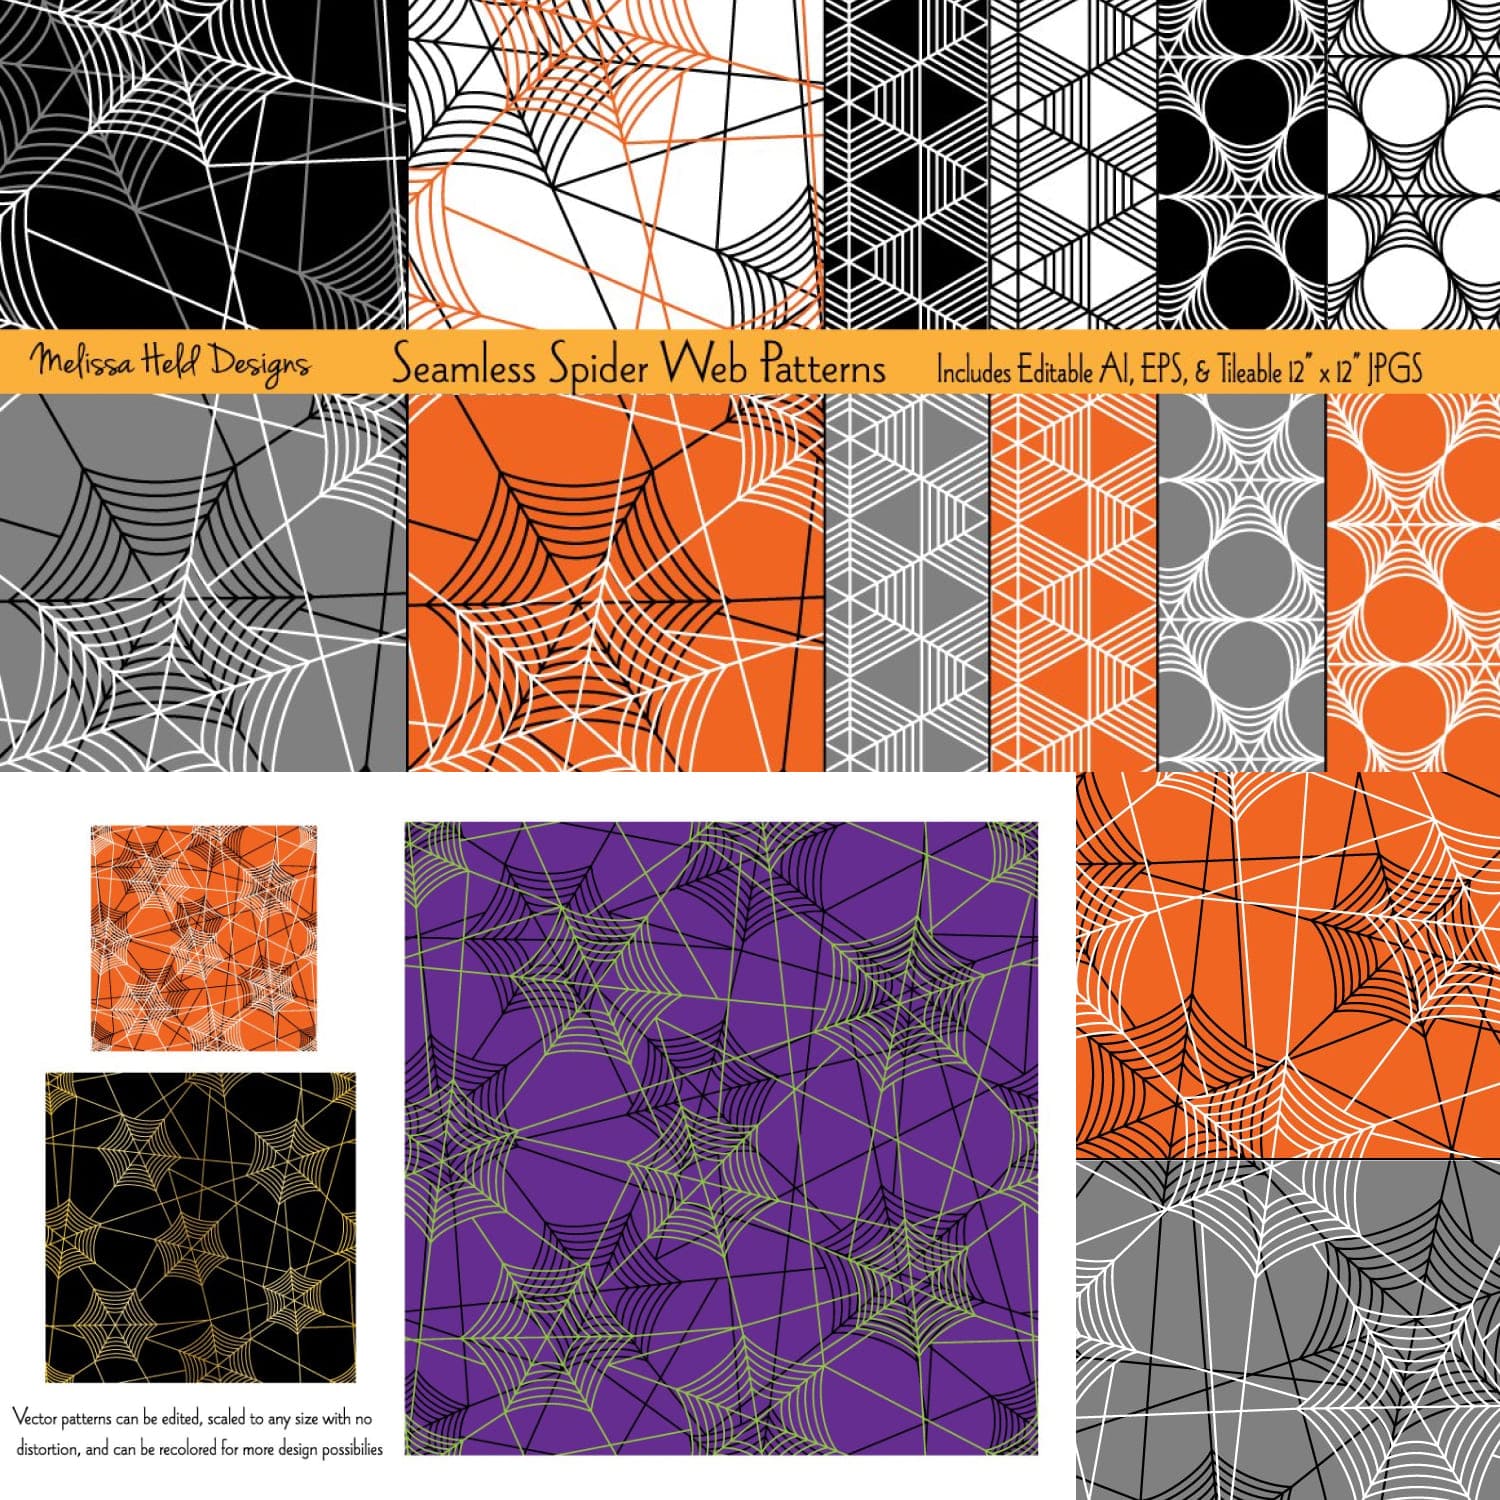 Seamless Halloween Spider Web Patterns - main image preview.